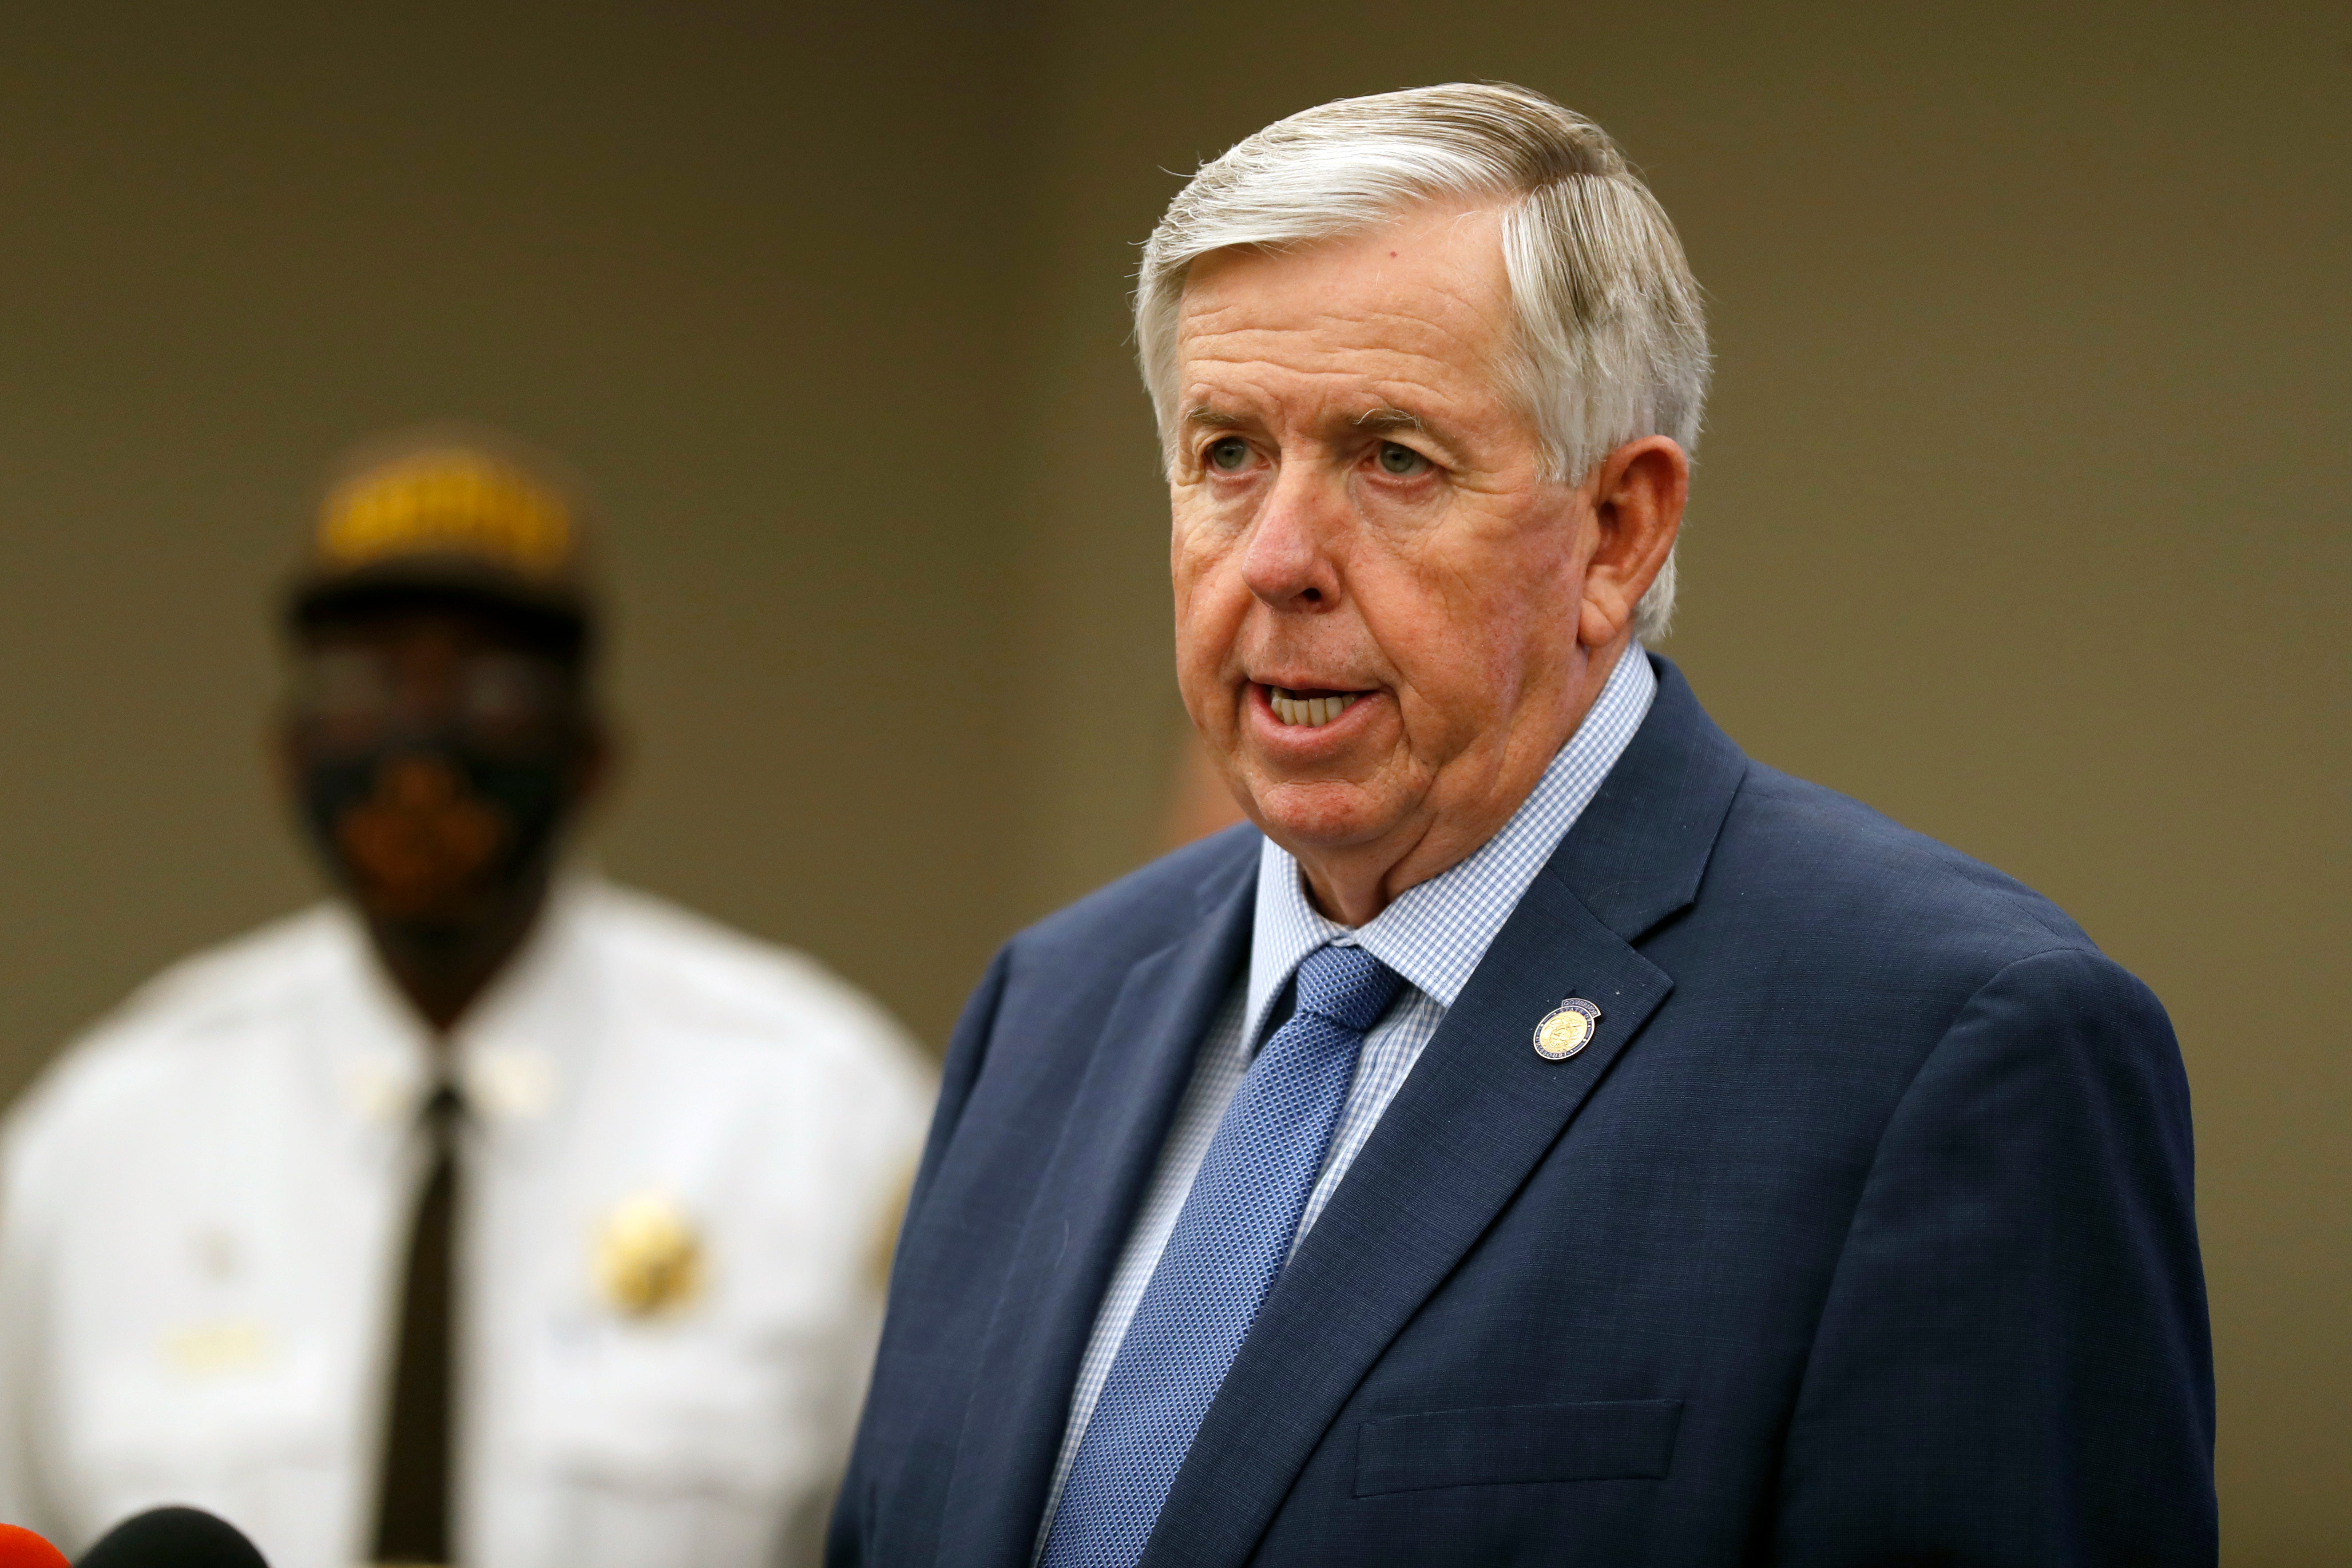 Missouri Gov. Mike Parson speaks during a news conference in St. Louis (file photo)